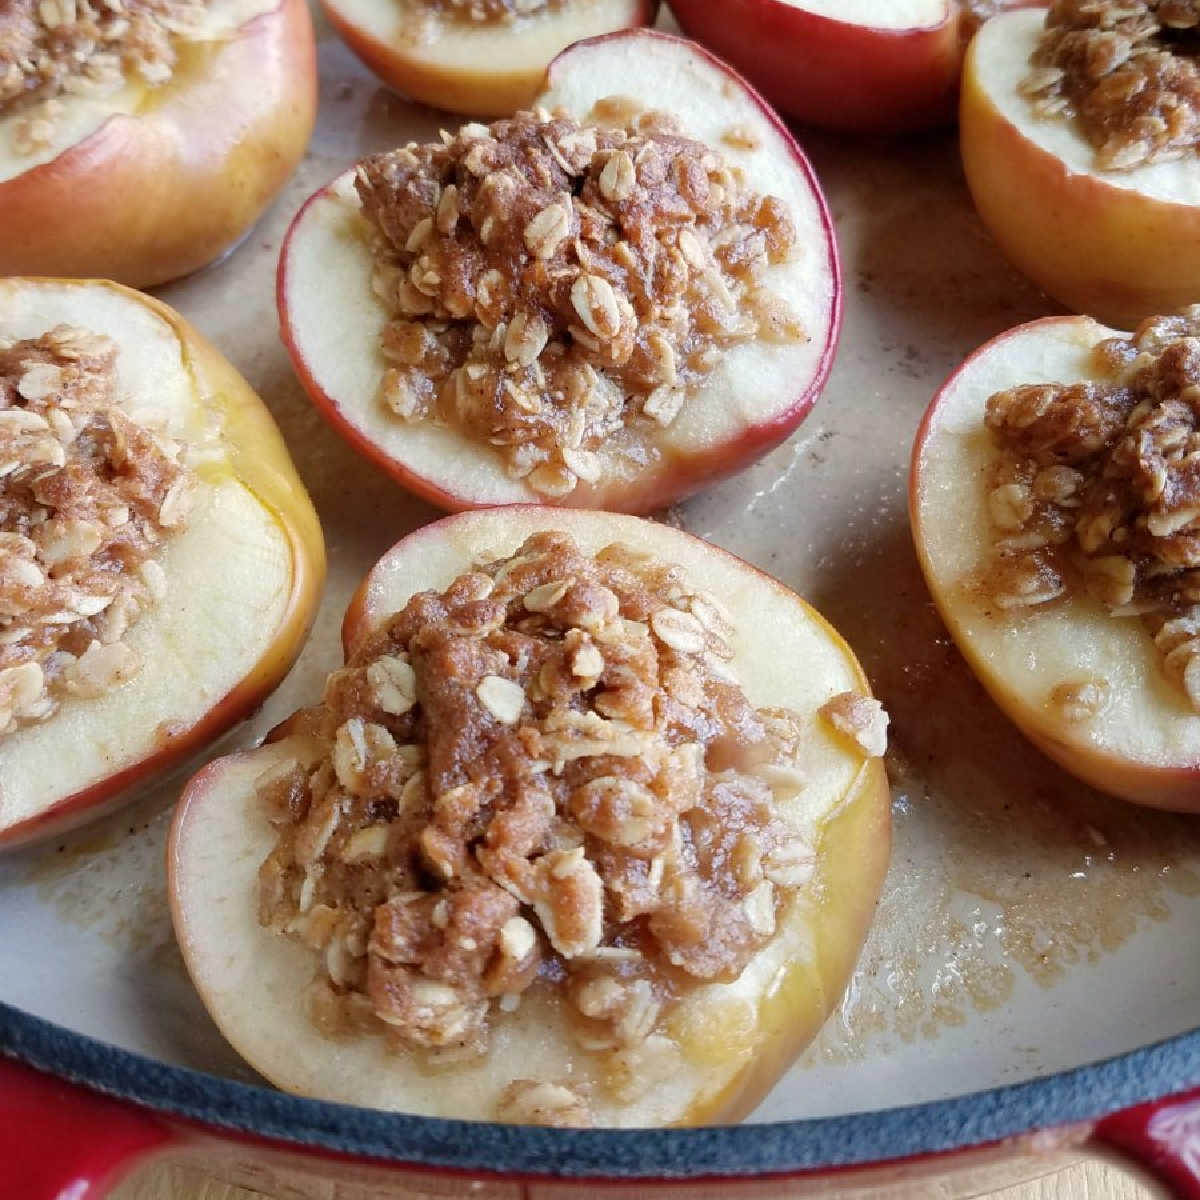 Pan of baked apple halves with brown sugar and oatmeal filling.